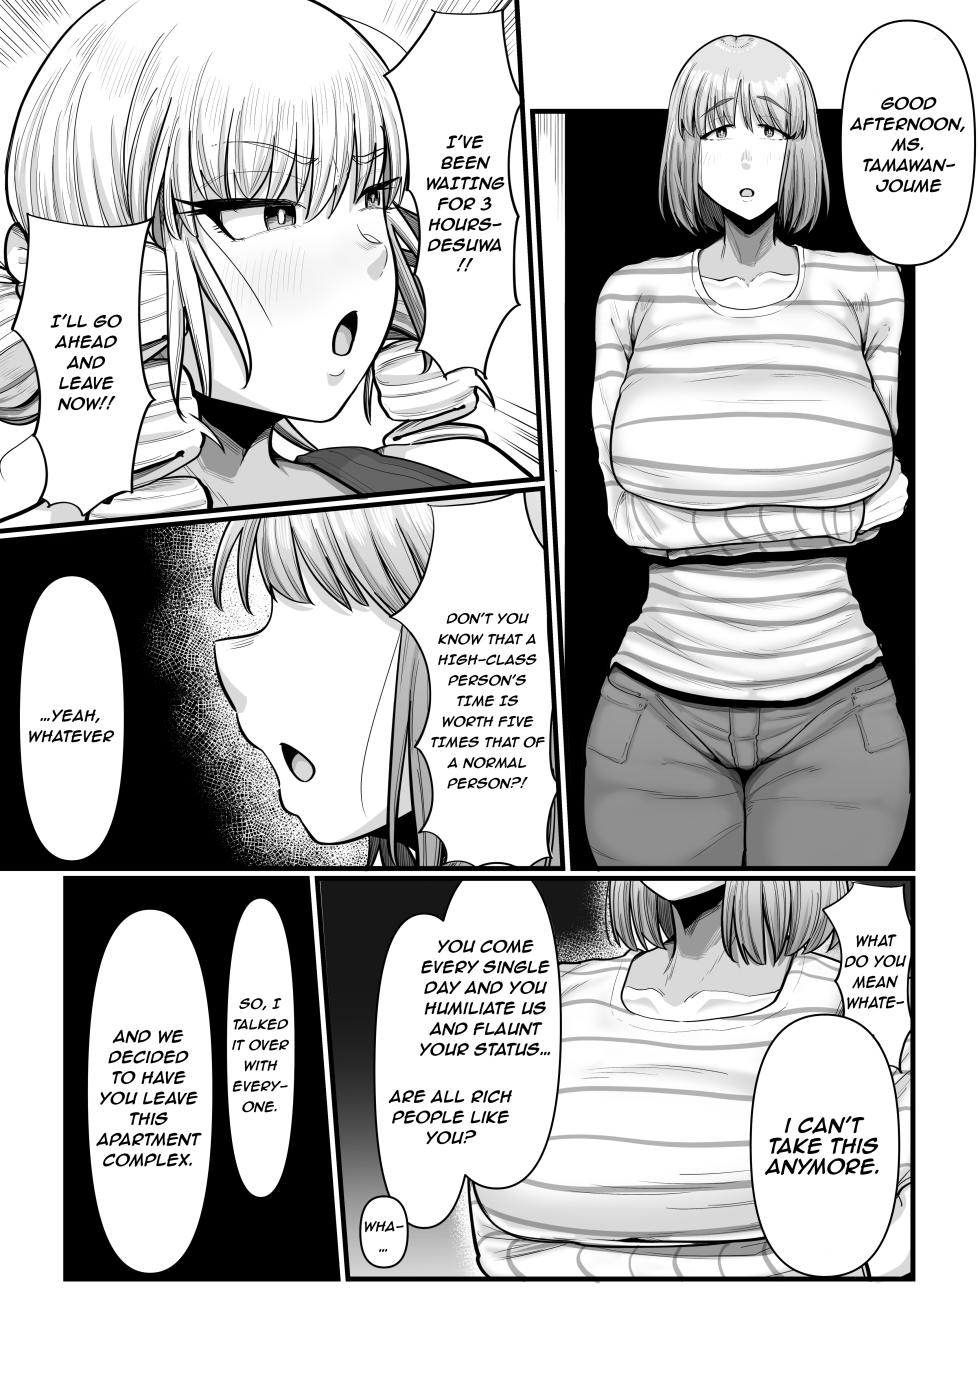 [Ebi no Implant (Shrimp Cake)](New Futanari Ojou-sama Tenant Just Moved In) Suburban Mansion Looking For Tenants [Fully Equipped With Futanari Meat Toilet] {EL JEFE Hentai Truck} - Page 11